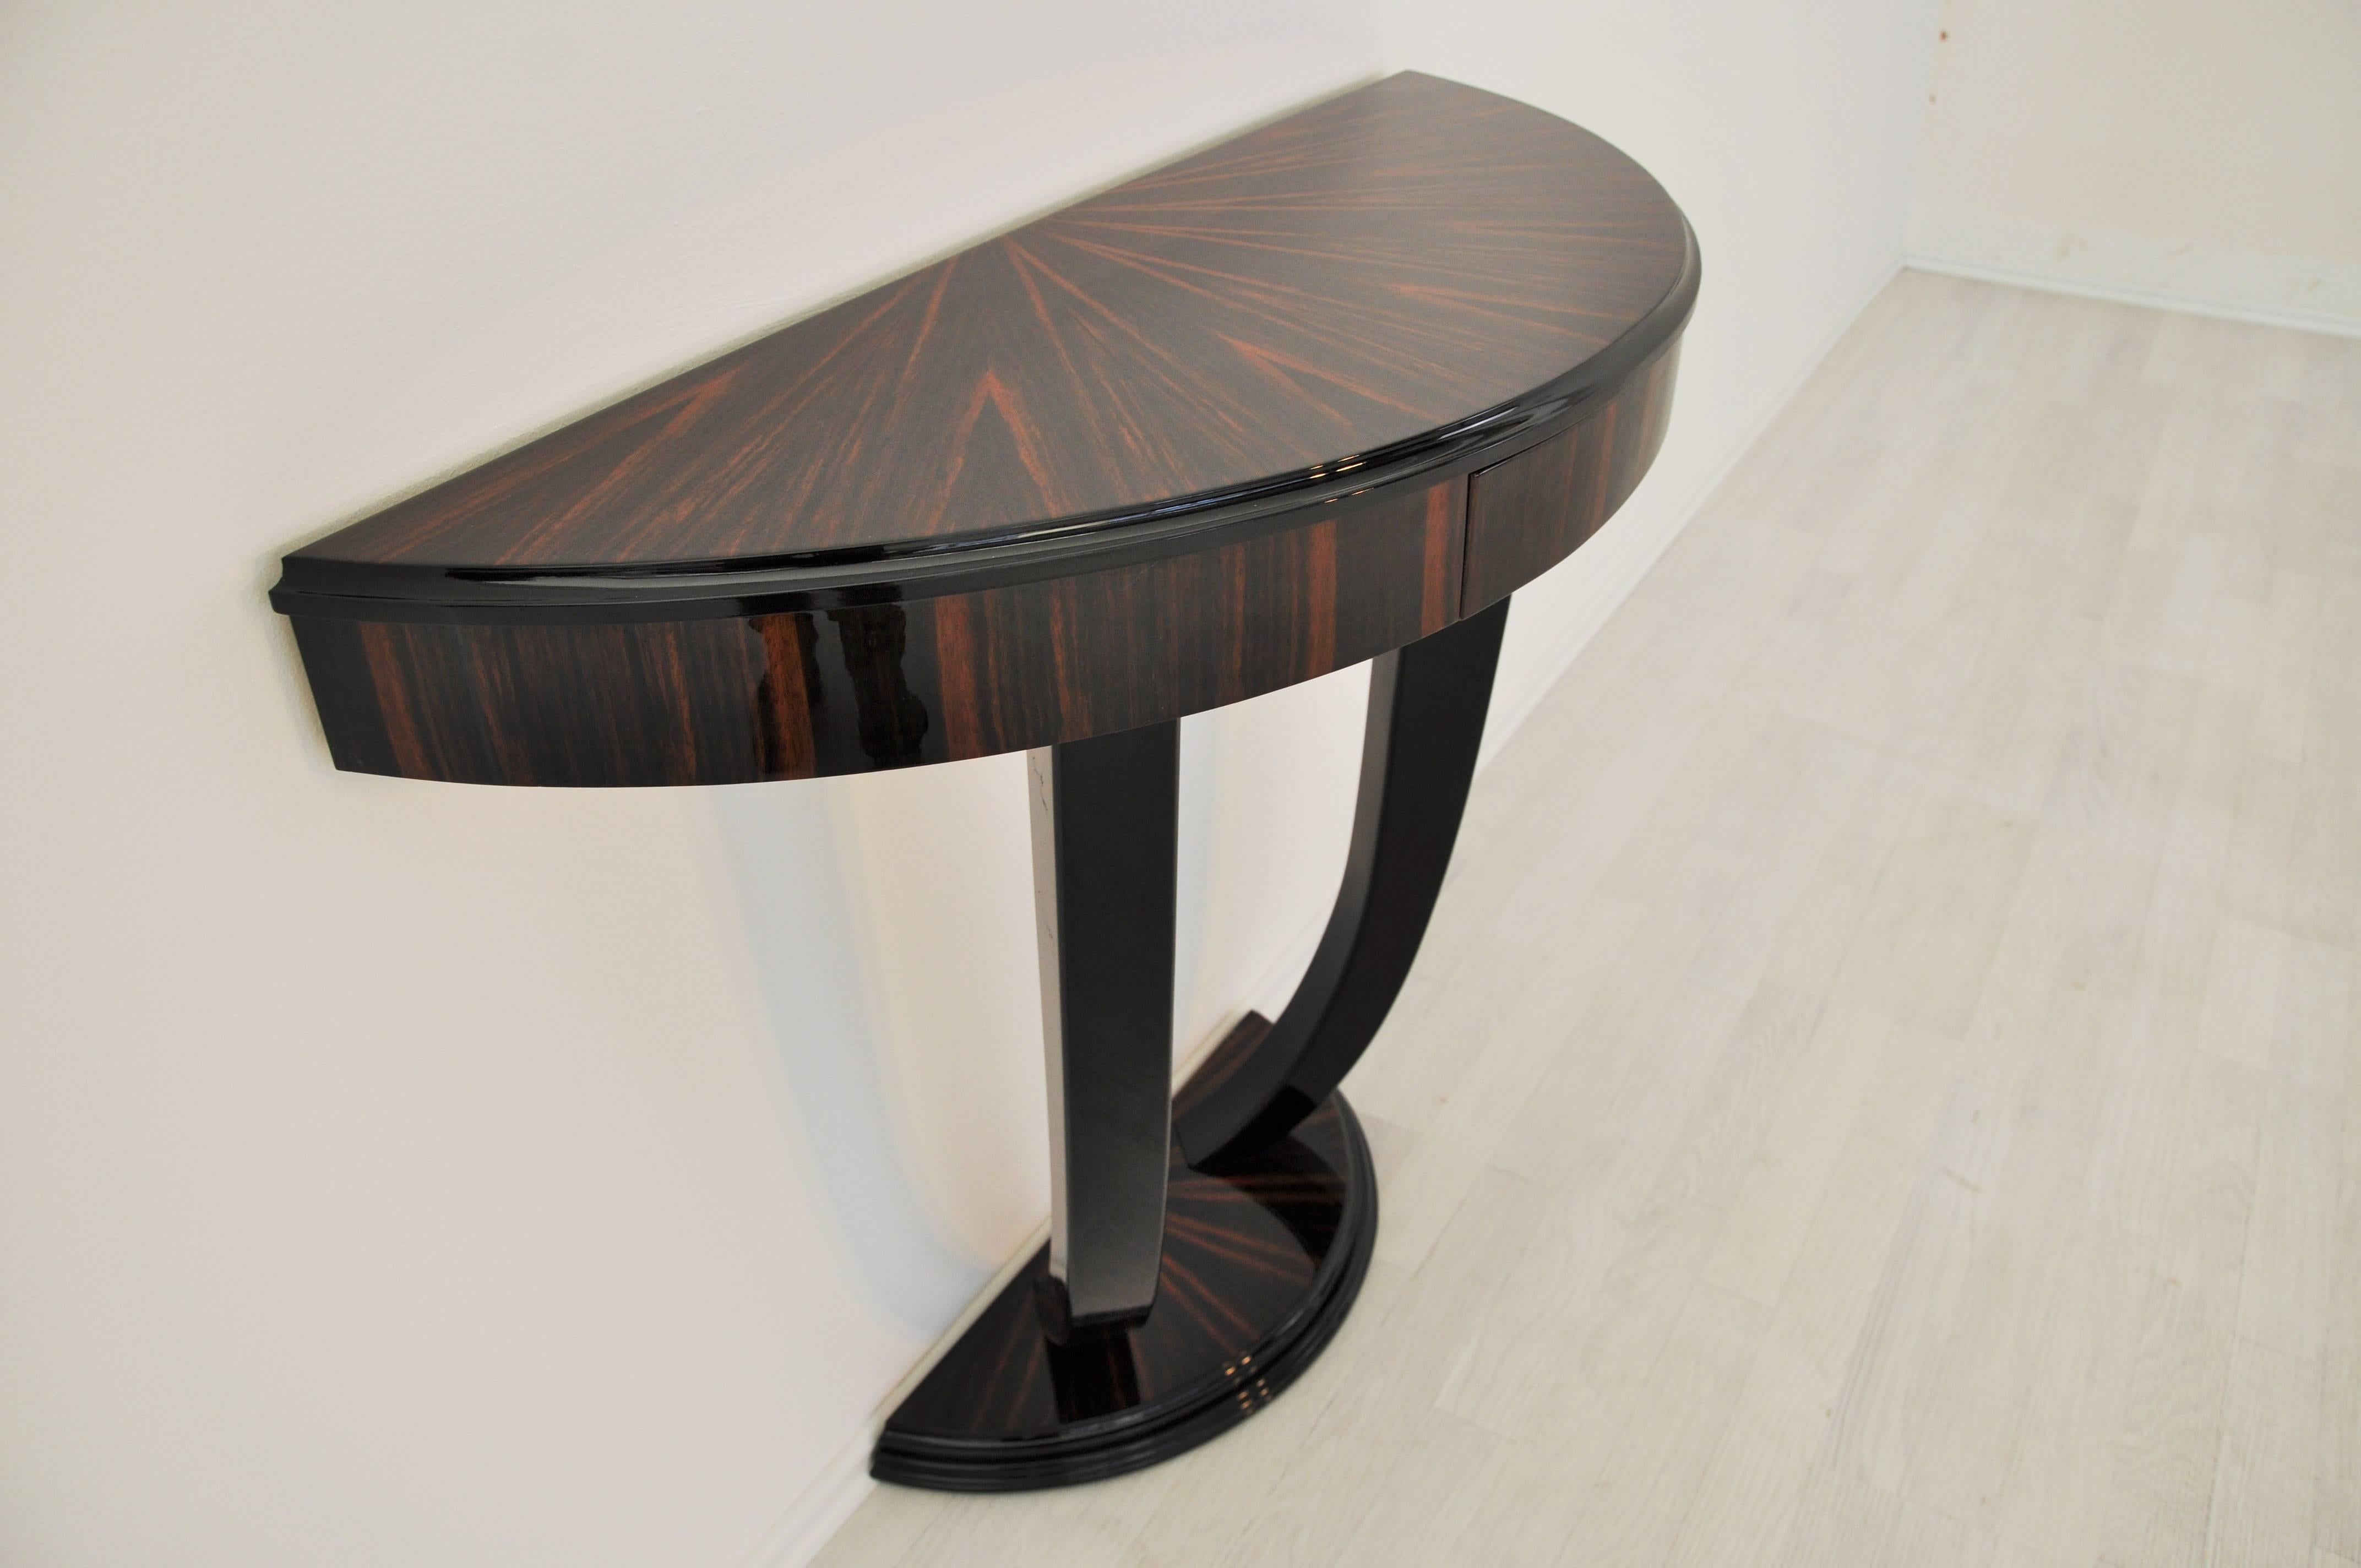 Stunning Art Deco design wall console with a wonderful Macassar veneer. Finished all around with a high gloss lacquer. The curved legs are worked with high quality piano lacquer. With a petite stair foot and fine details.